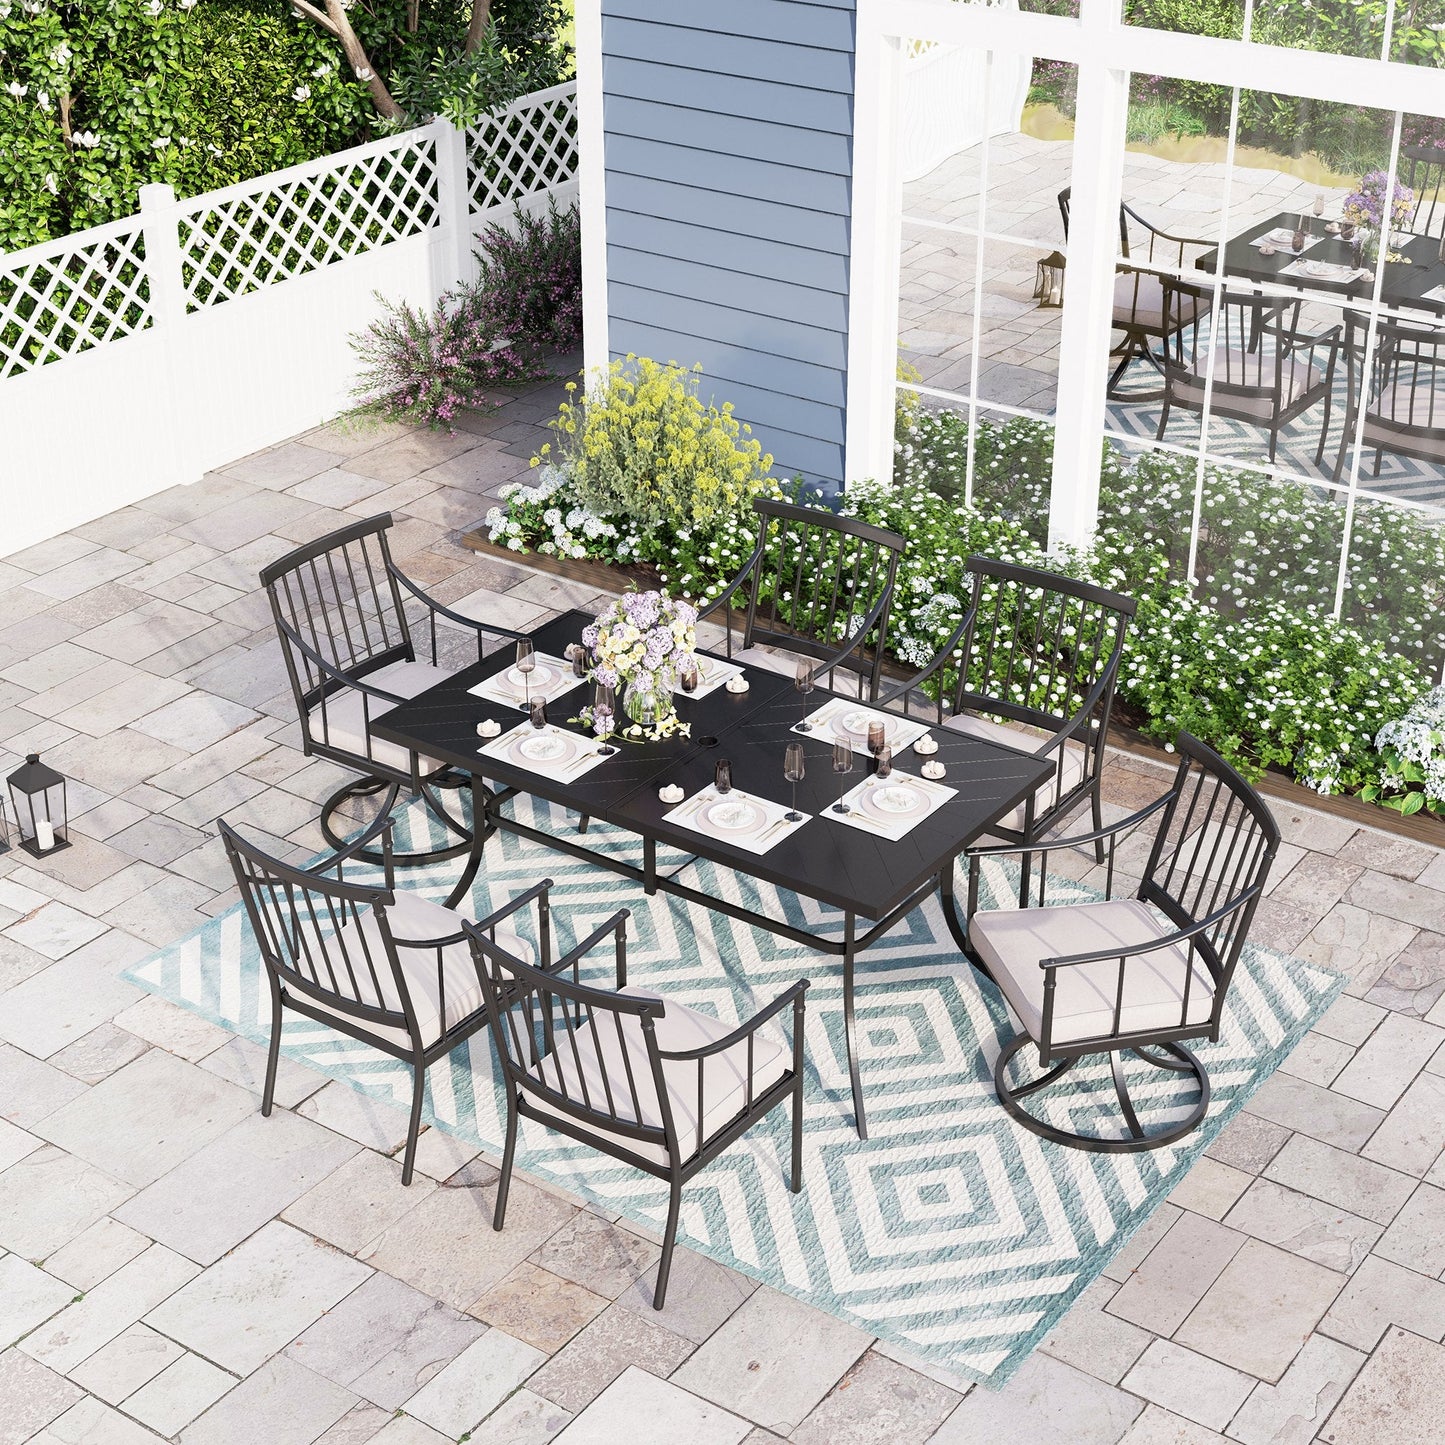 Sophia & William 7 Pieces Metal Patio Dining Set Swivel Chairs and Rectangular Table Set